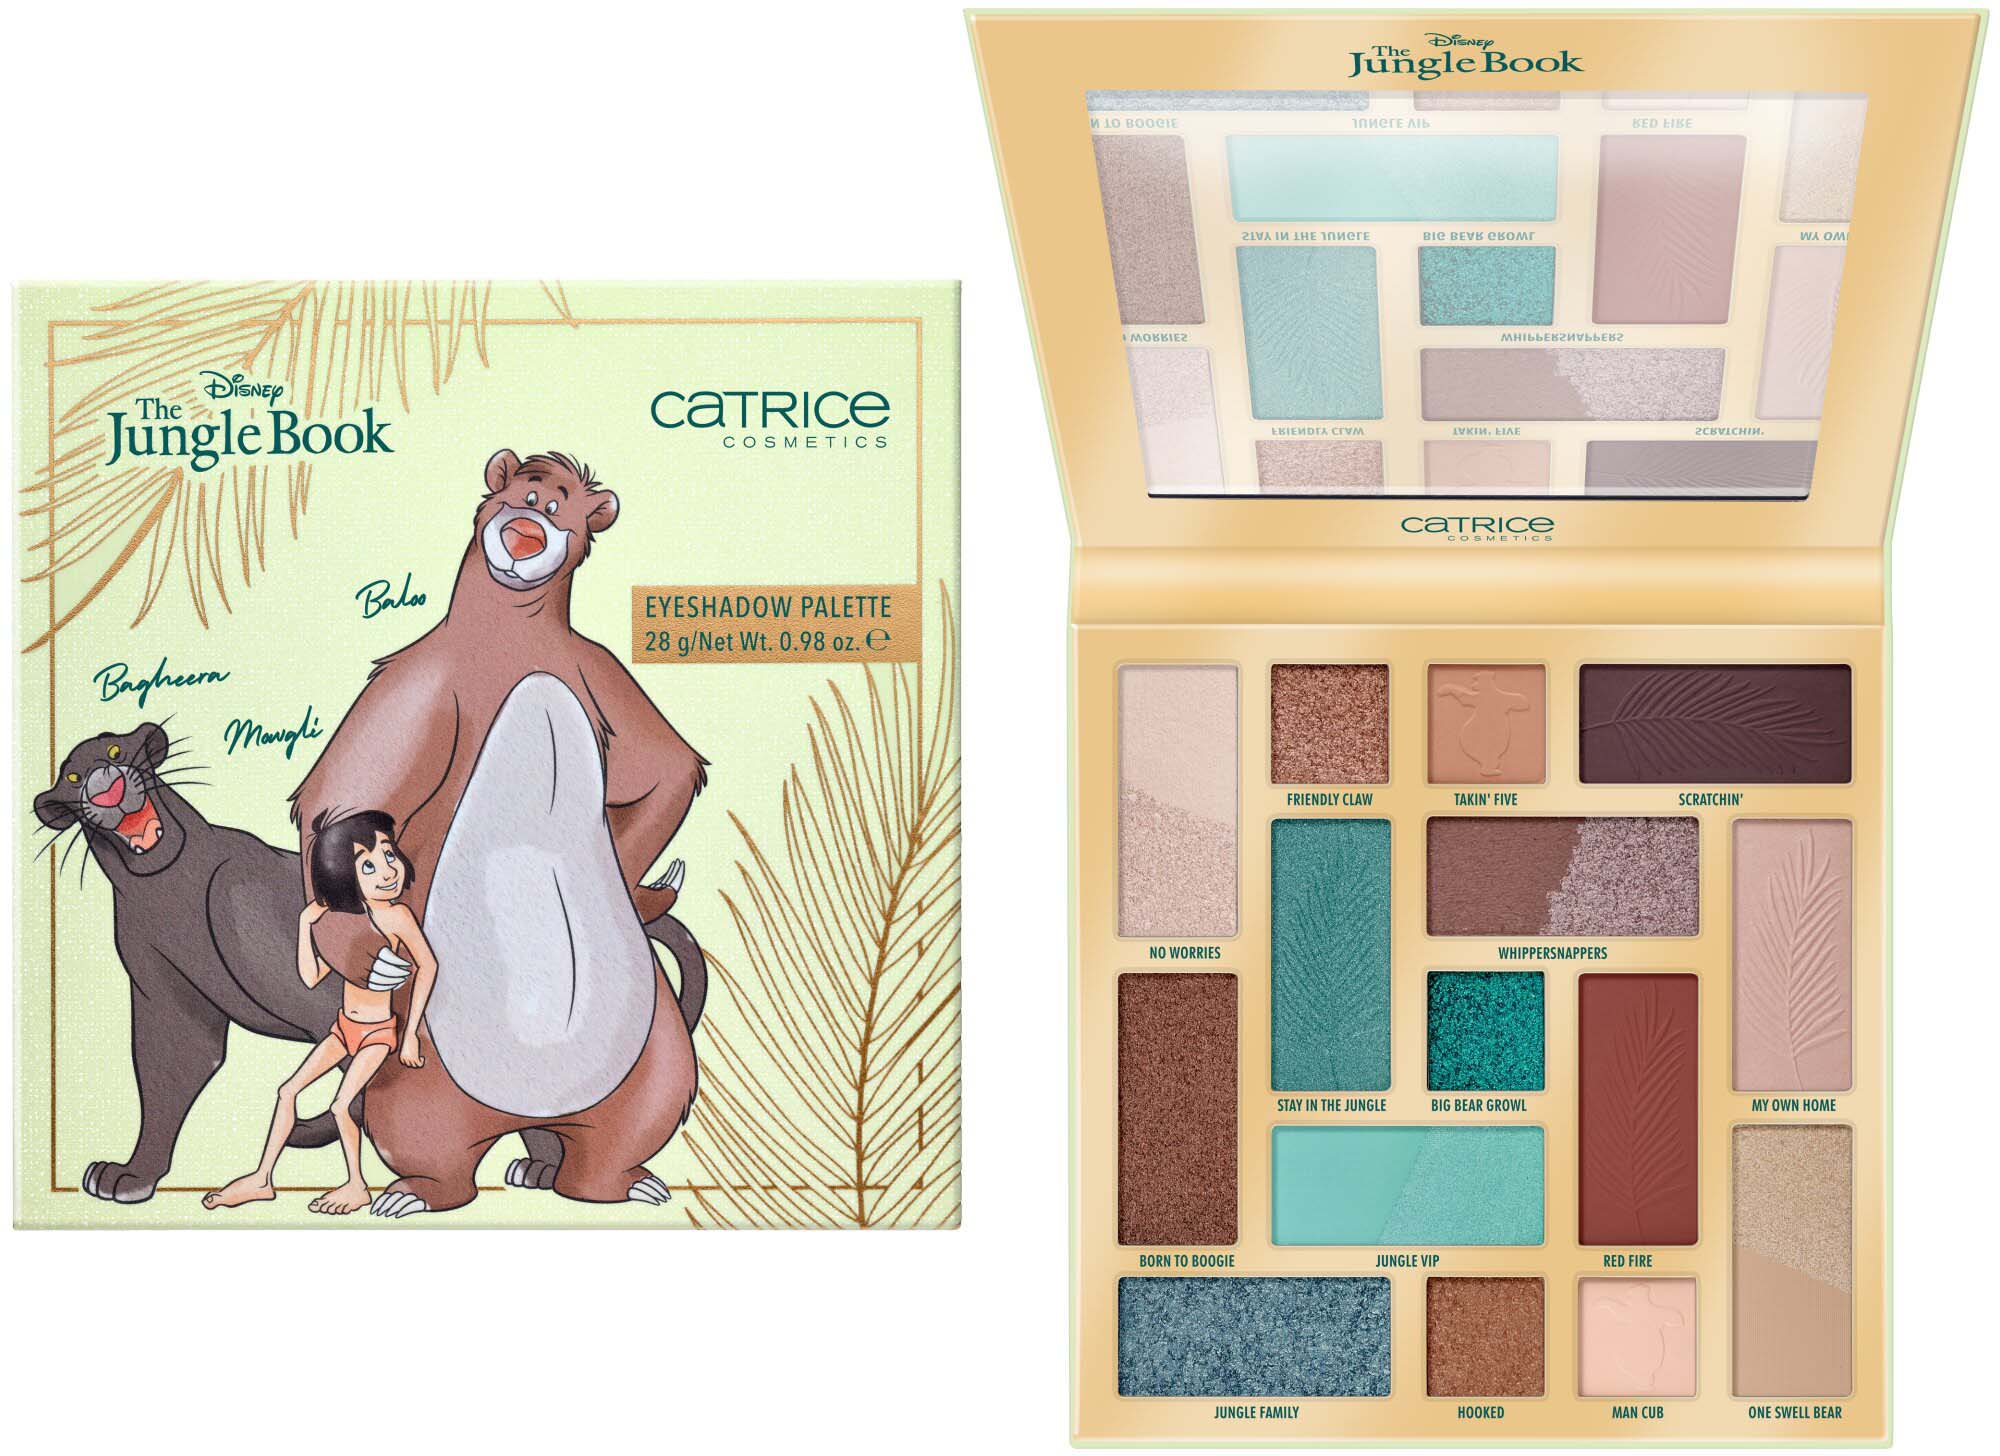 Bring the magic of The Jungle Book to life with Catrice Cosmetics